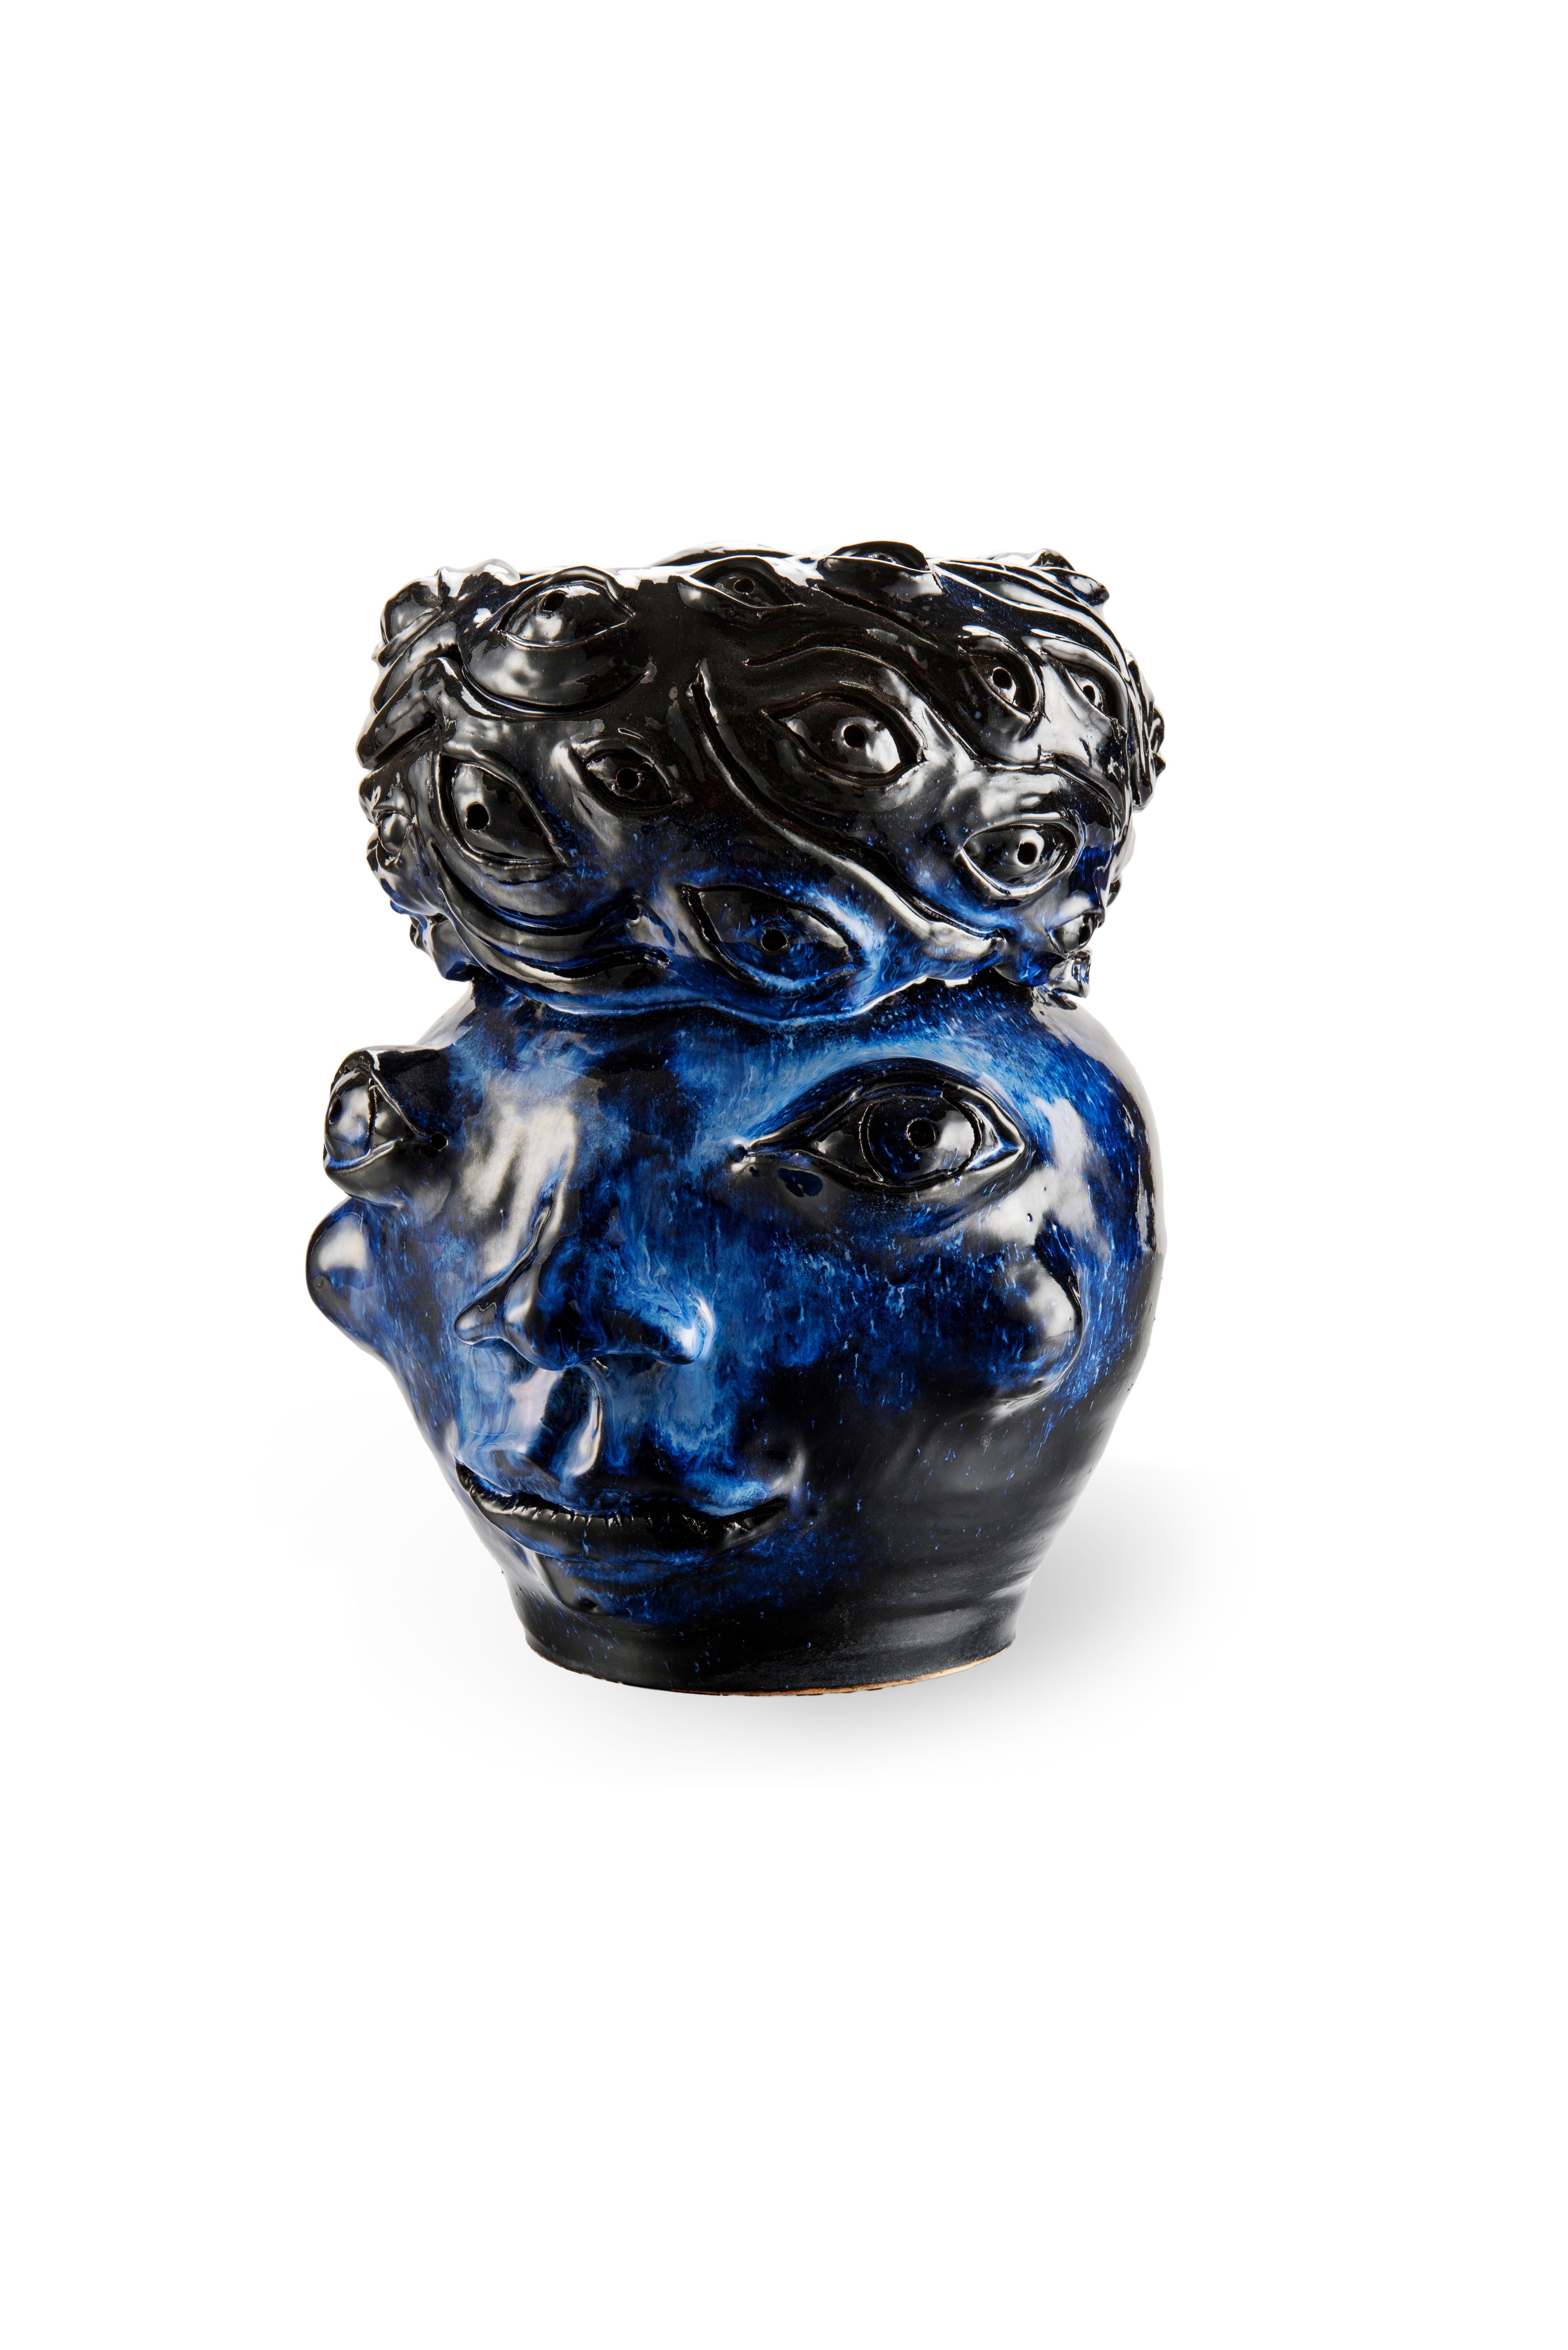 Italian Freaklab Vase Made Entirely by Hand in Ceramic, Blue-Black Color For Sale